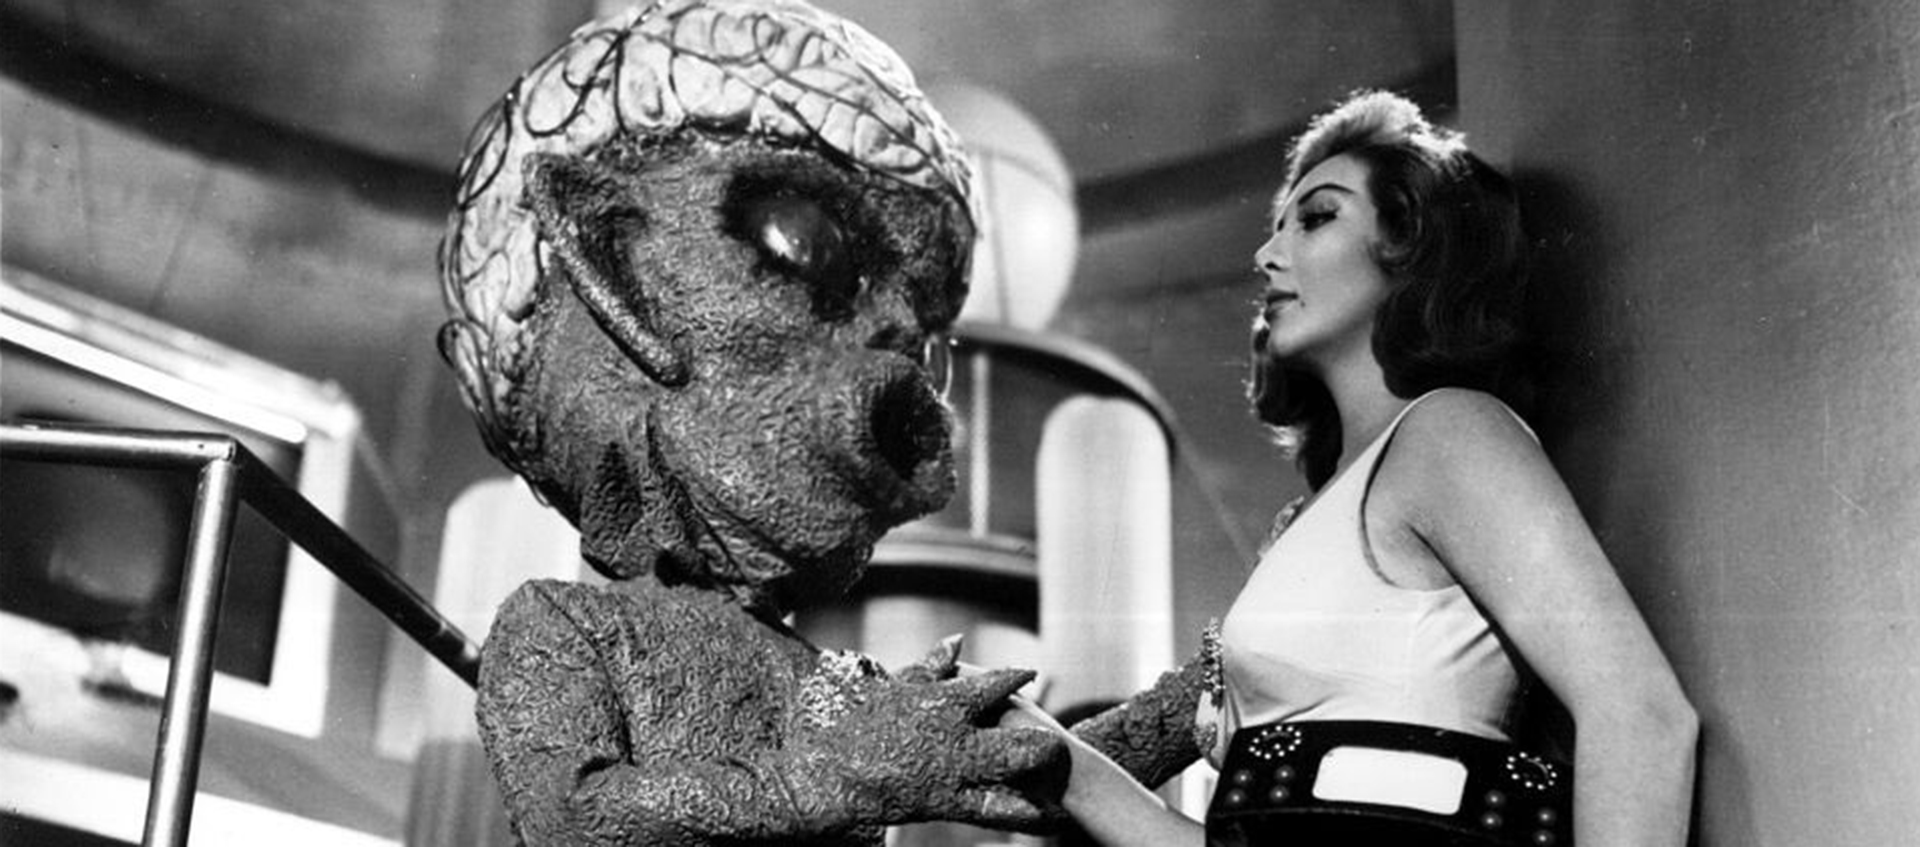 An alien with a large head holds a woman against a wall.